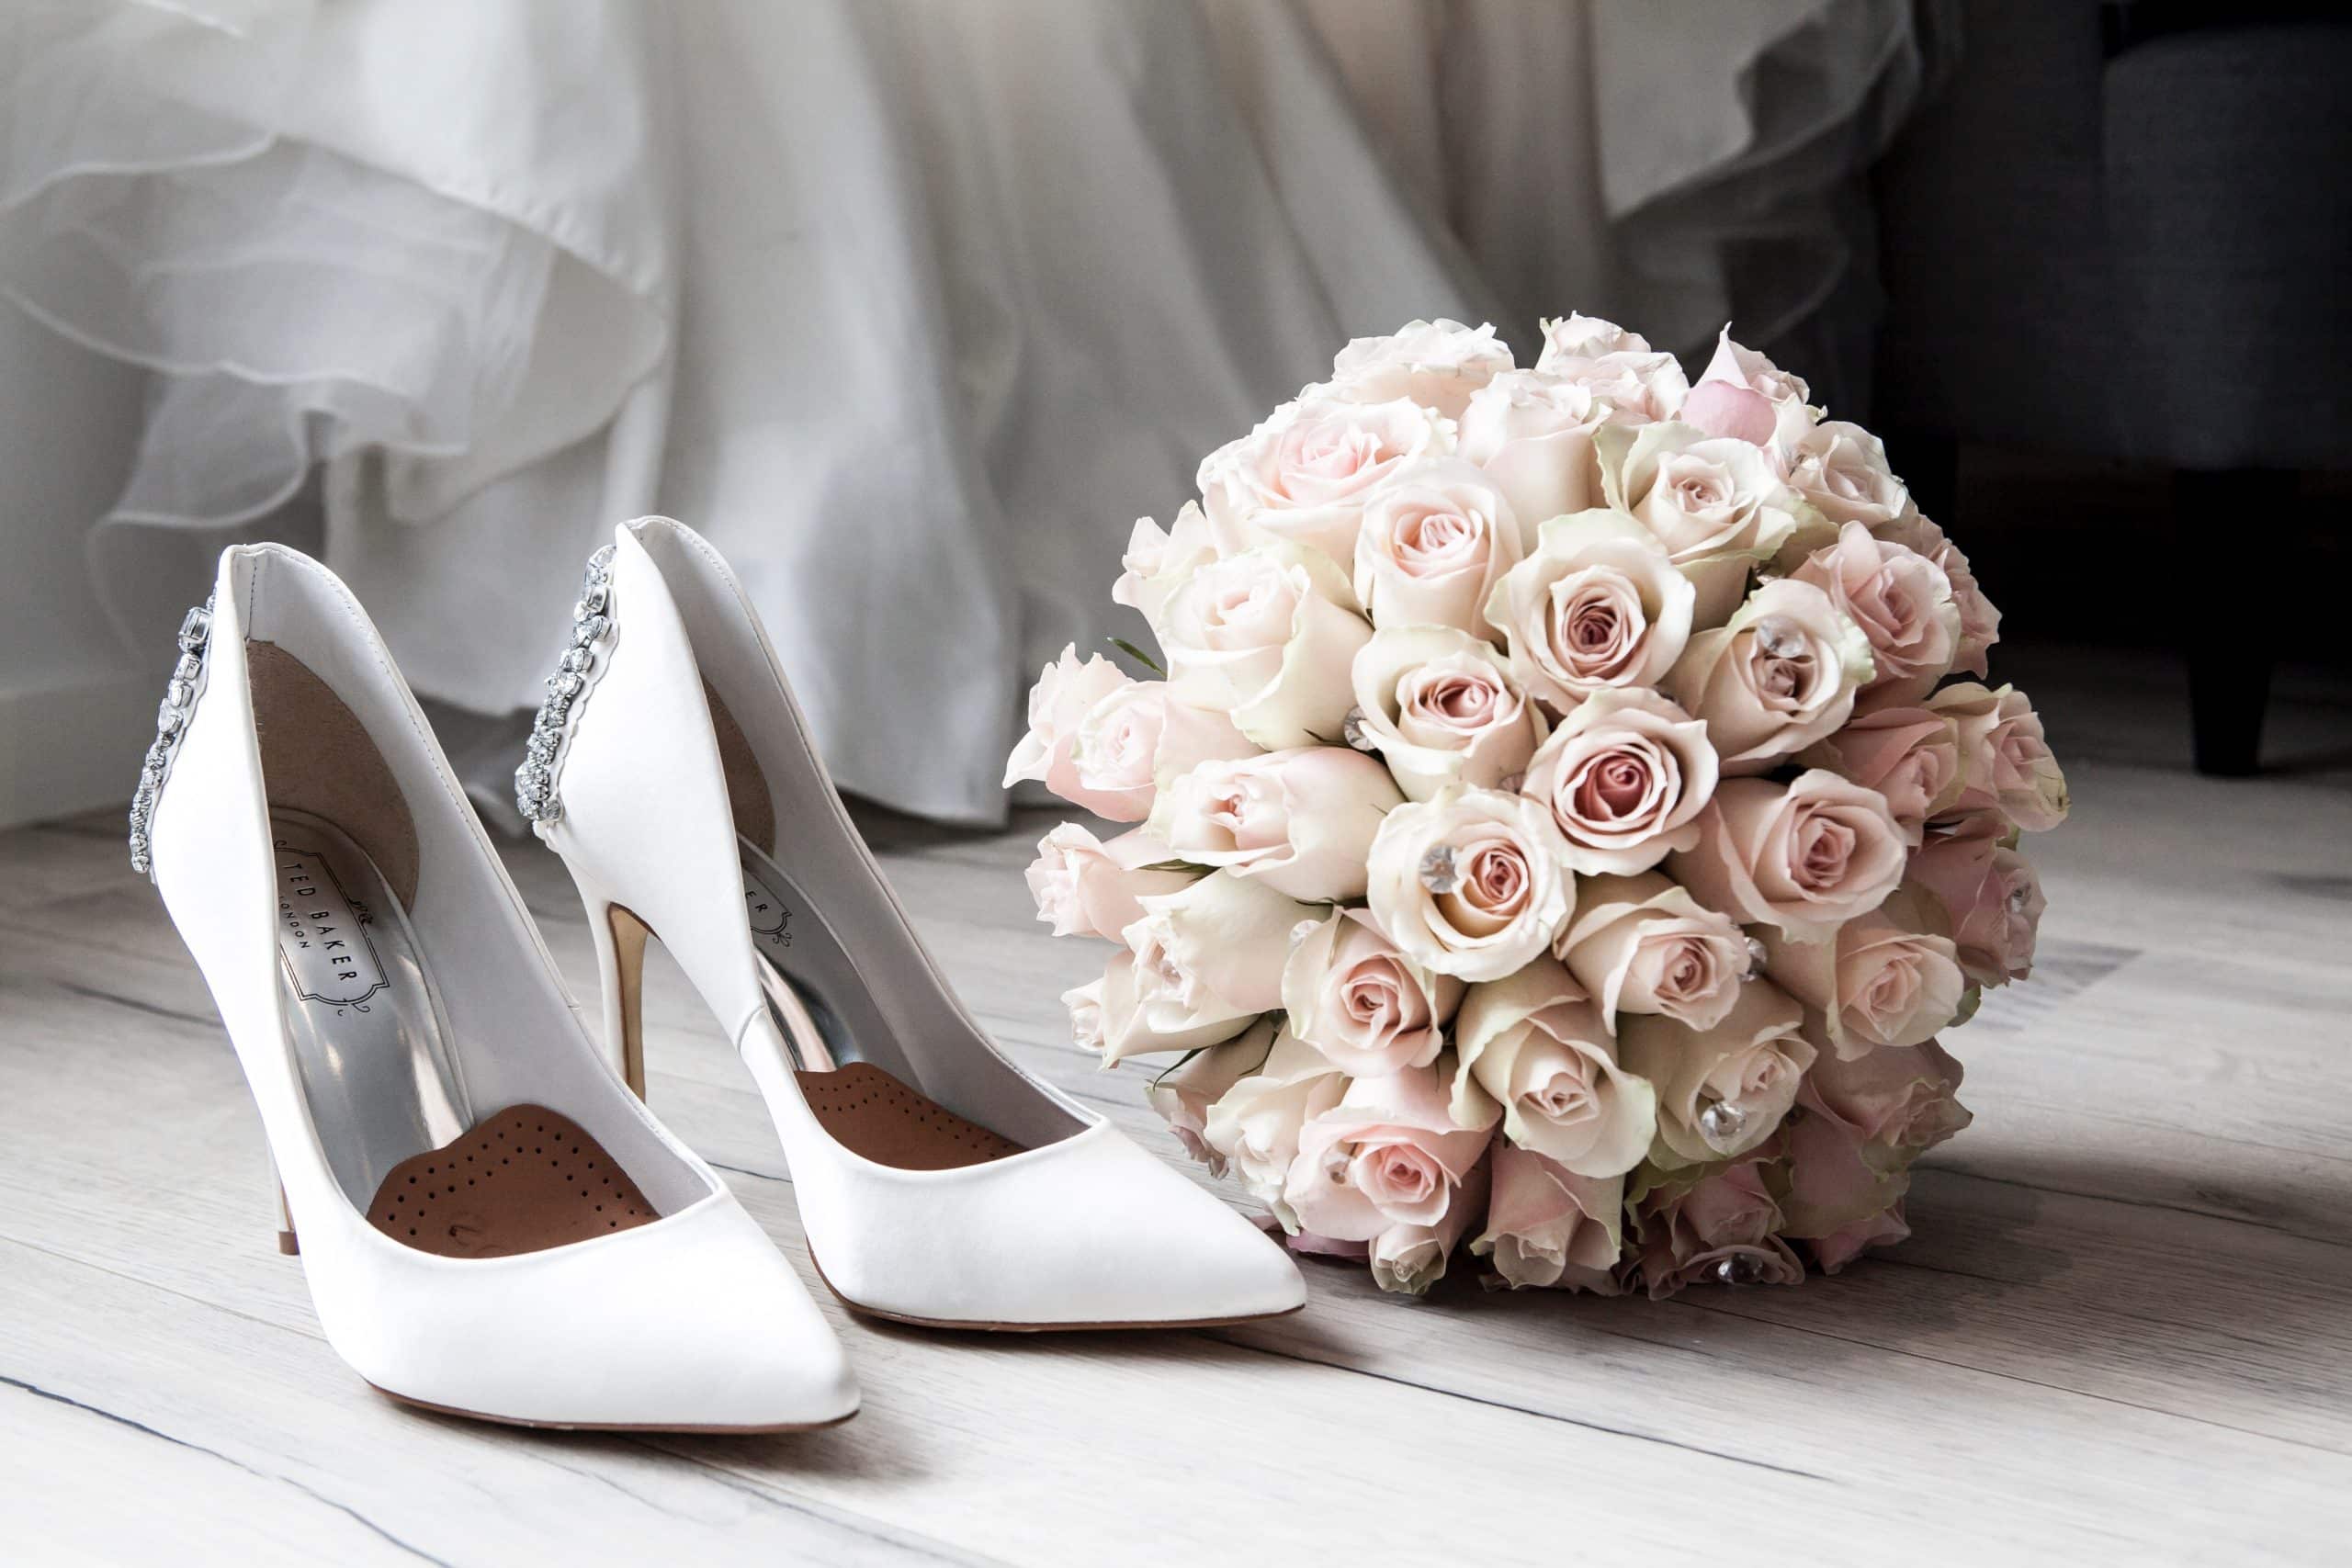 Close-up of wedding bouquet and shoes